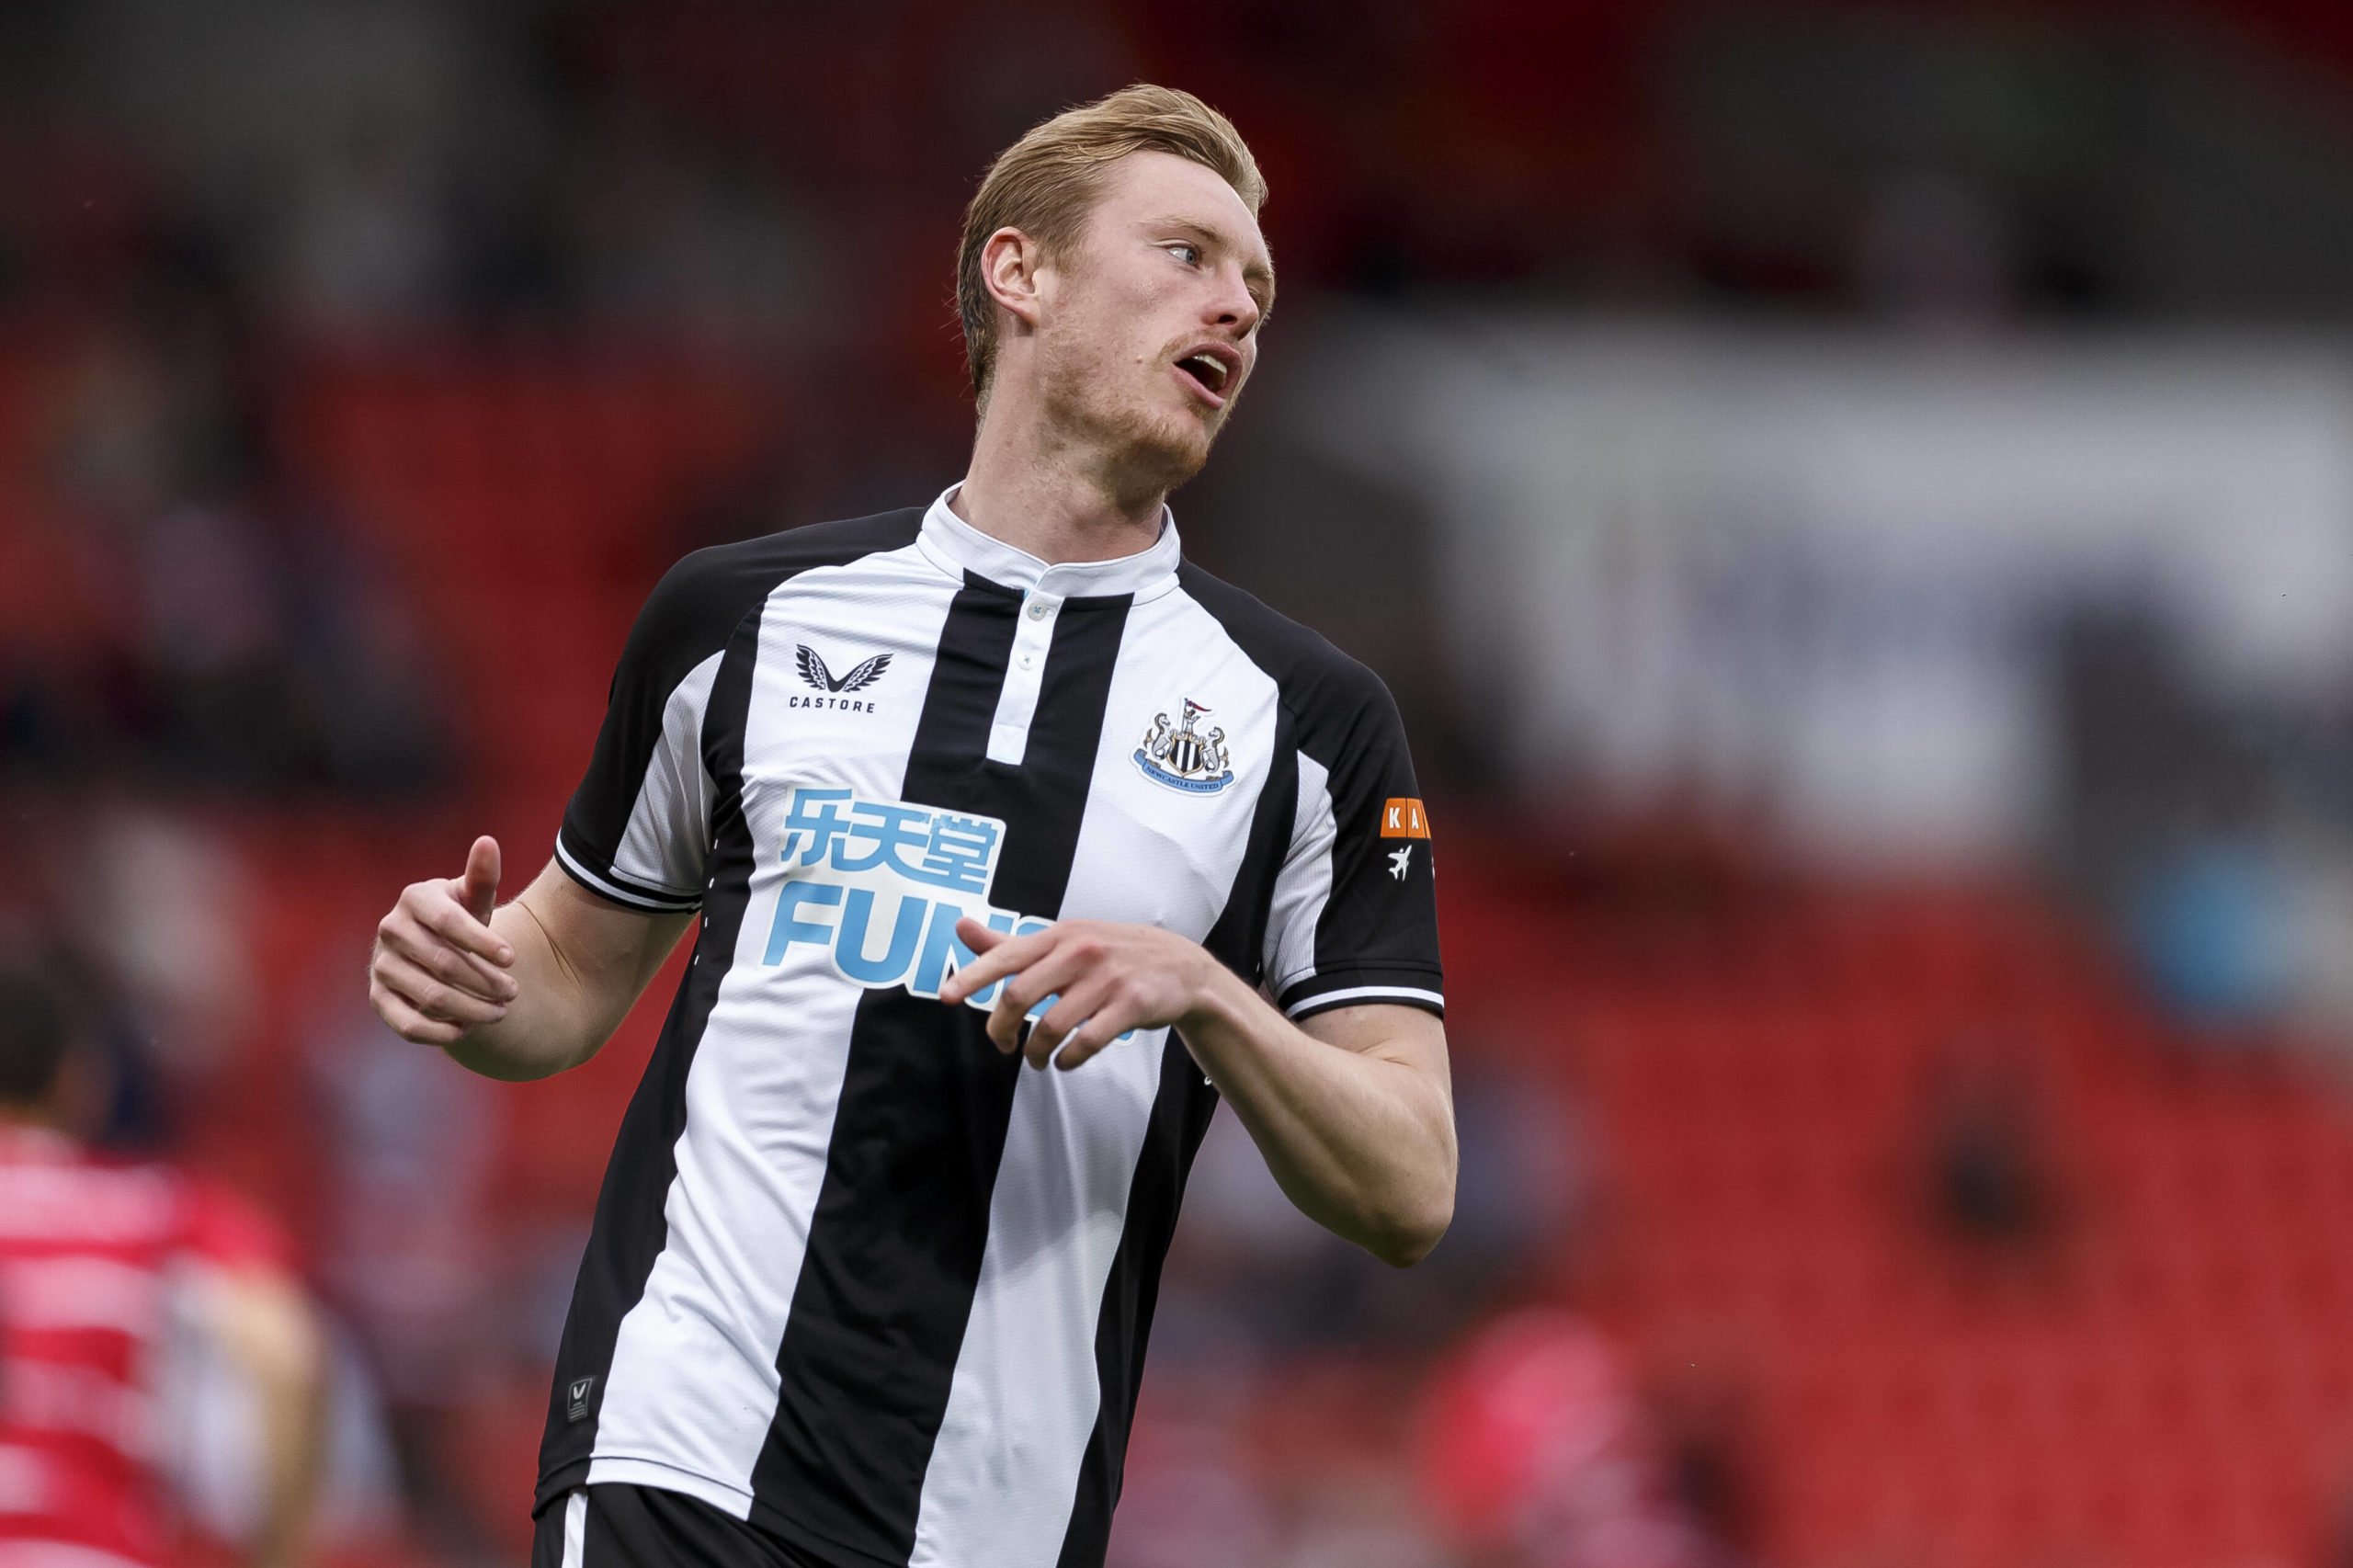 Newcastle hoping to reopen contract talks with Longstaff who is seen in the picture